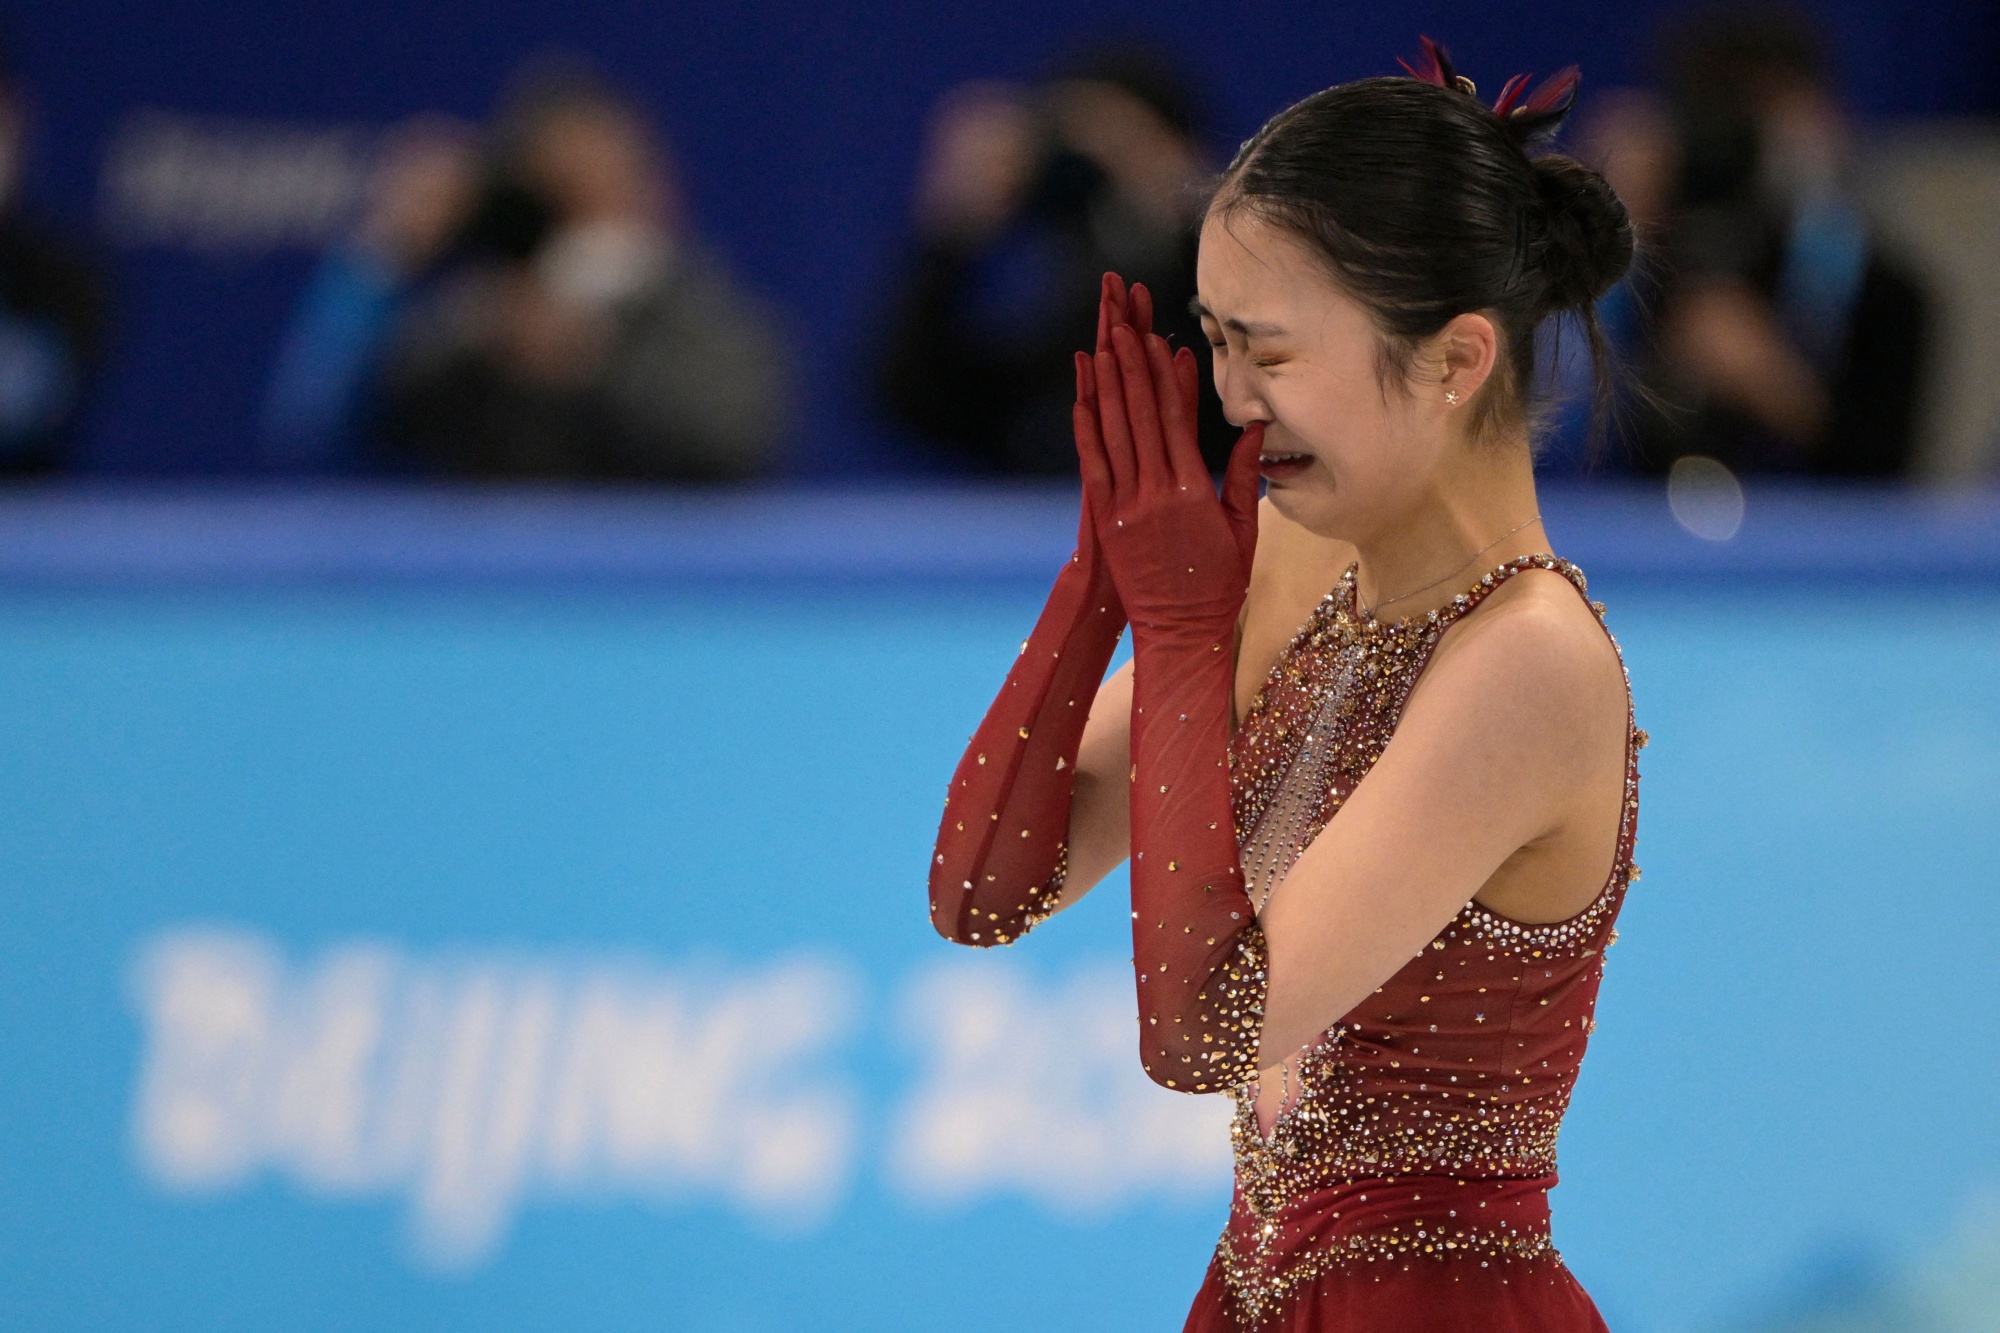 As China Celebrates Eileen Gu, Weibo Suspends Accounts Over Another Athlete